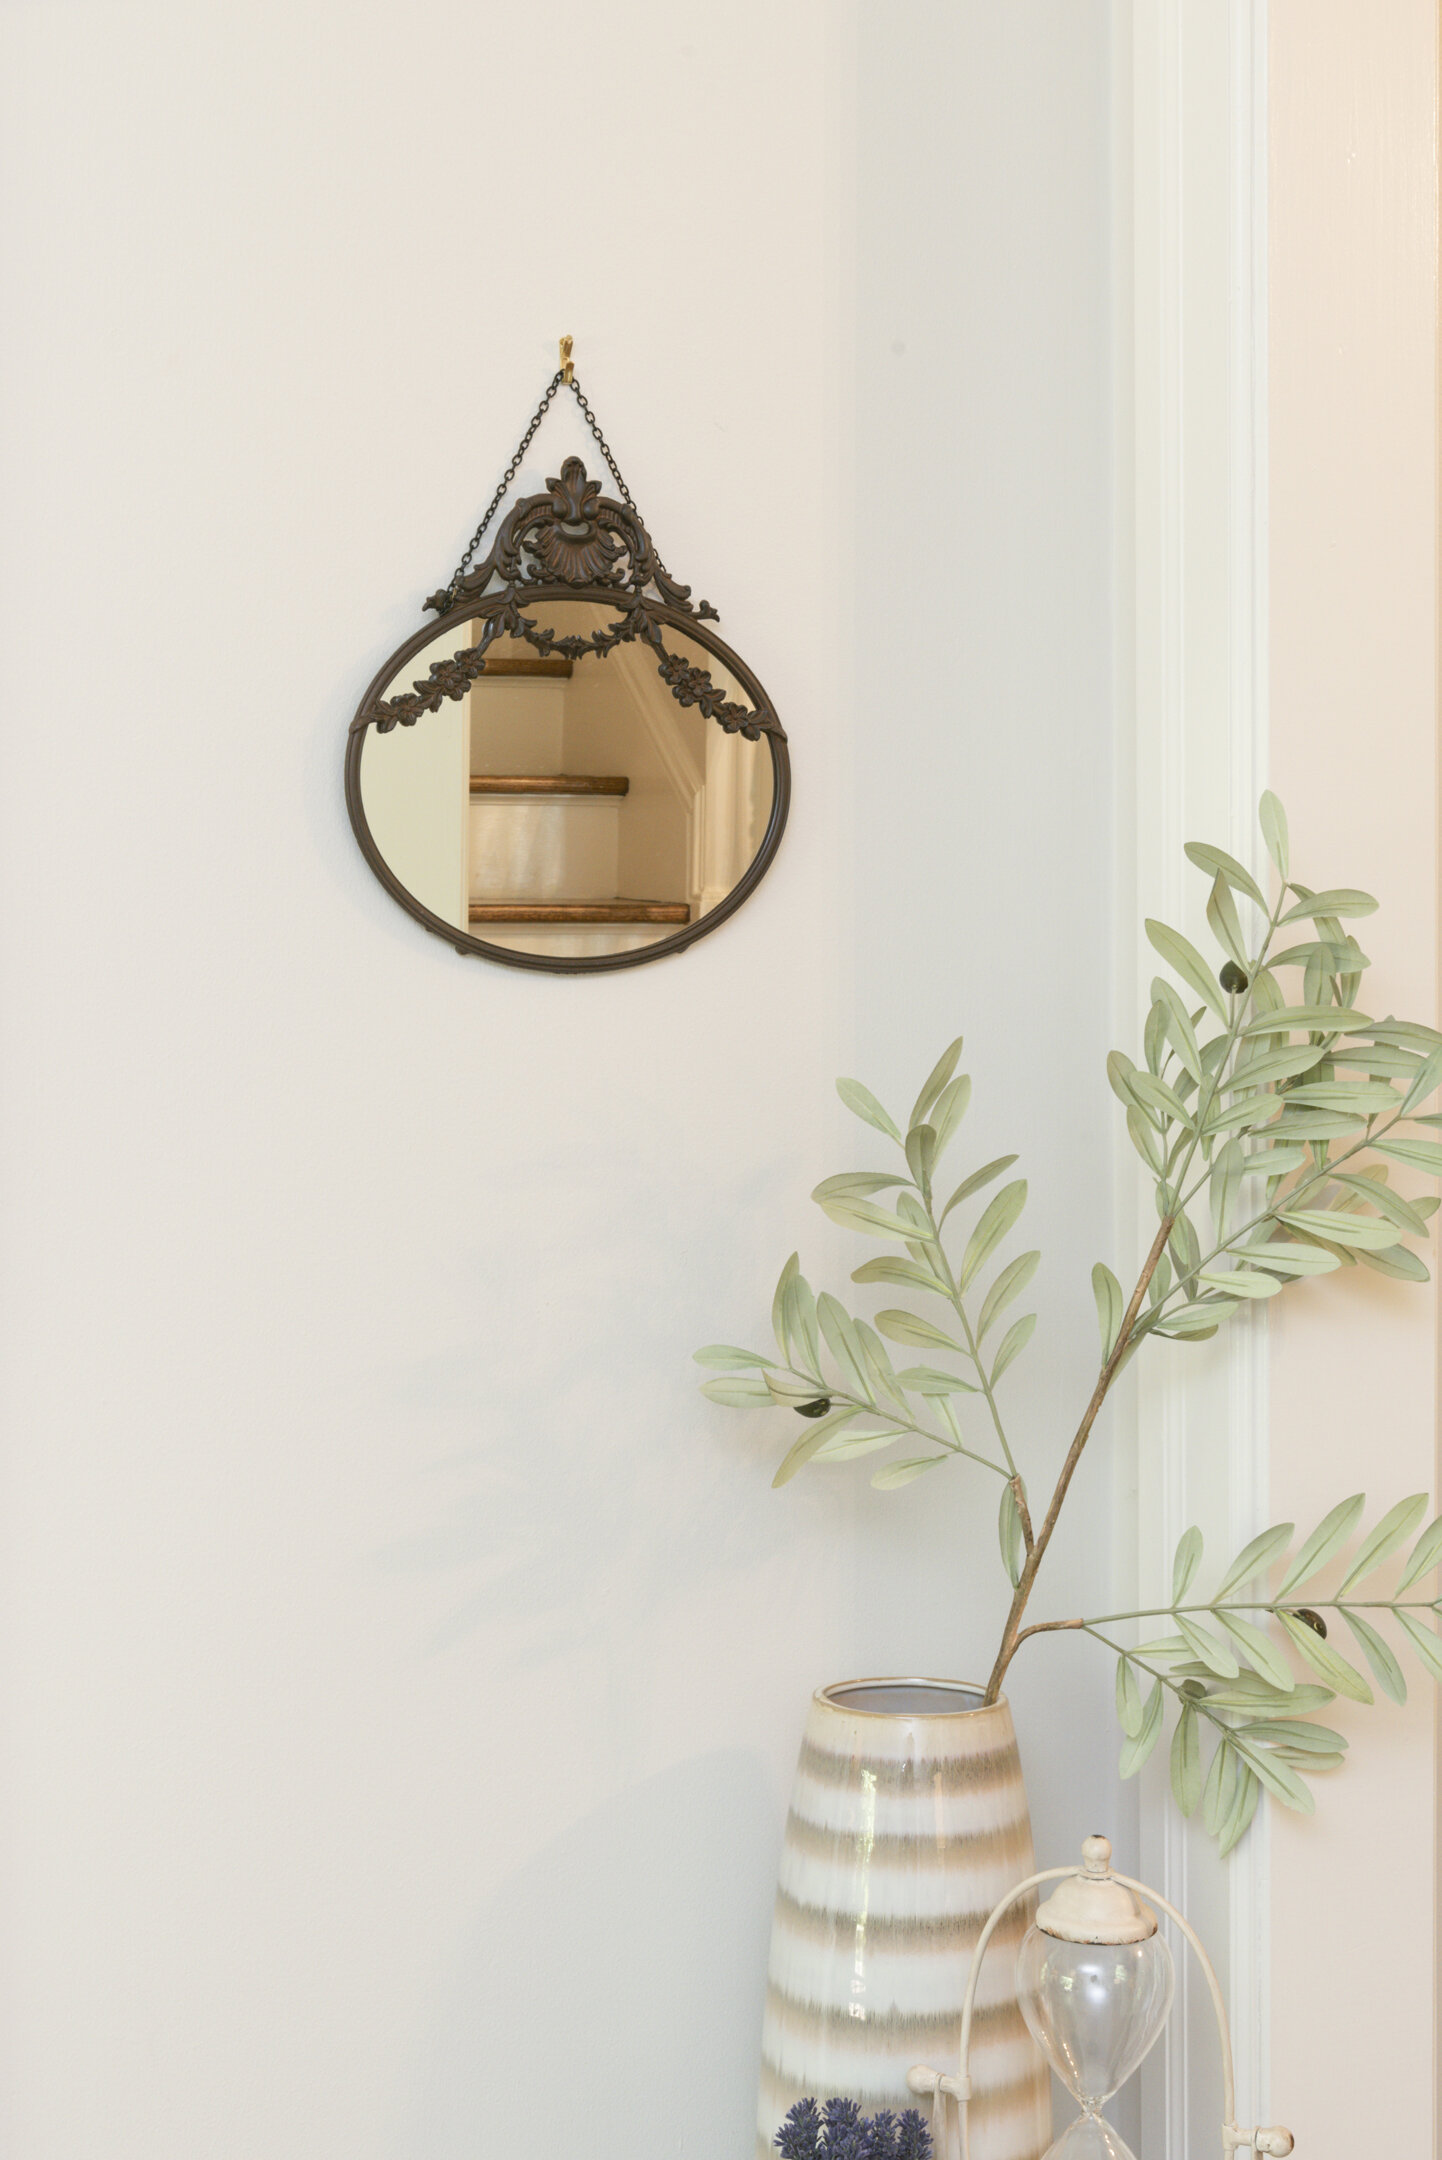 Pabst Oval Metal Wall Mirror